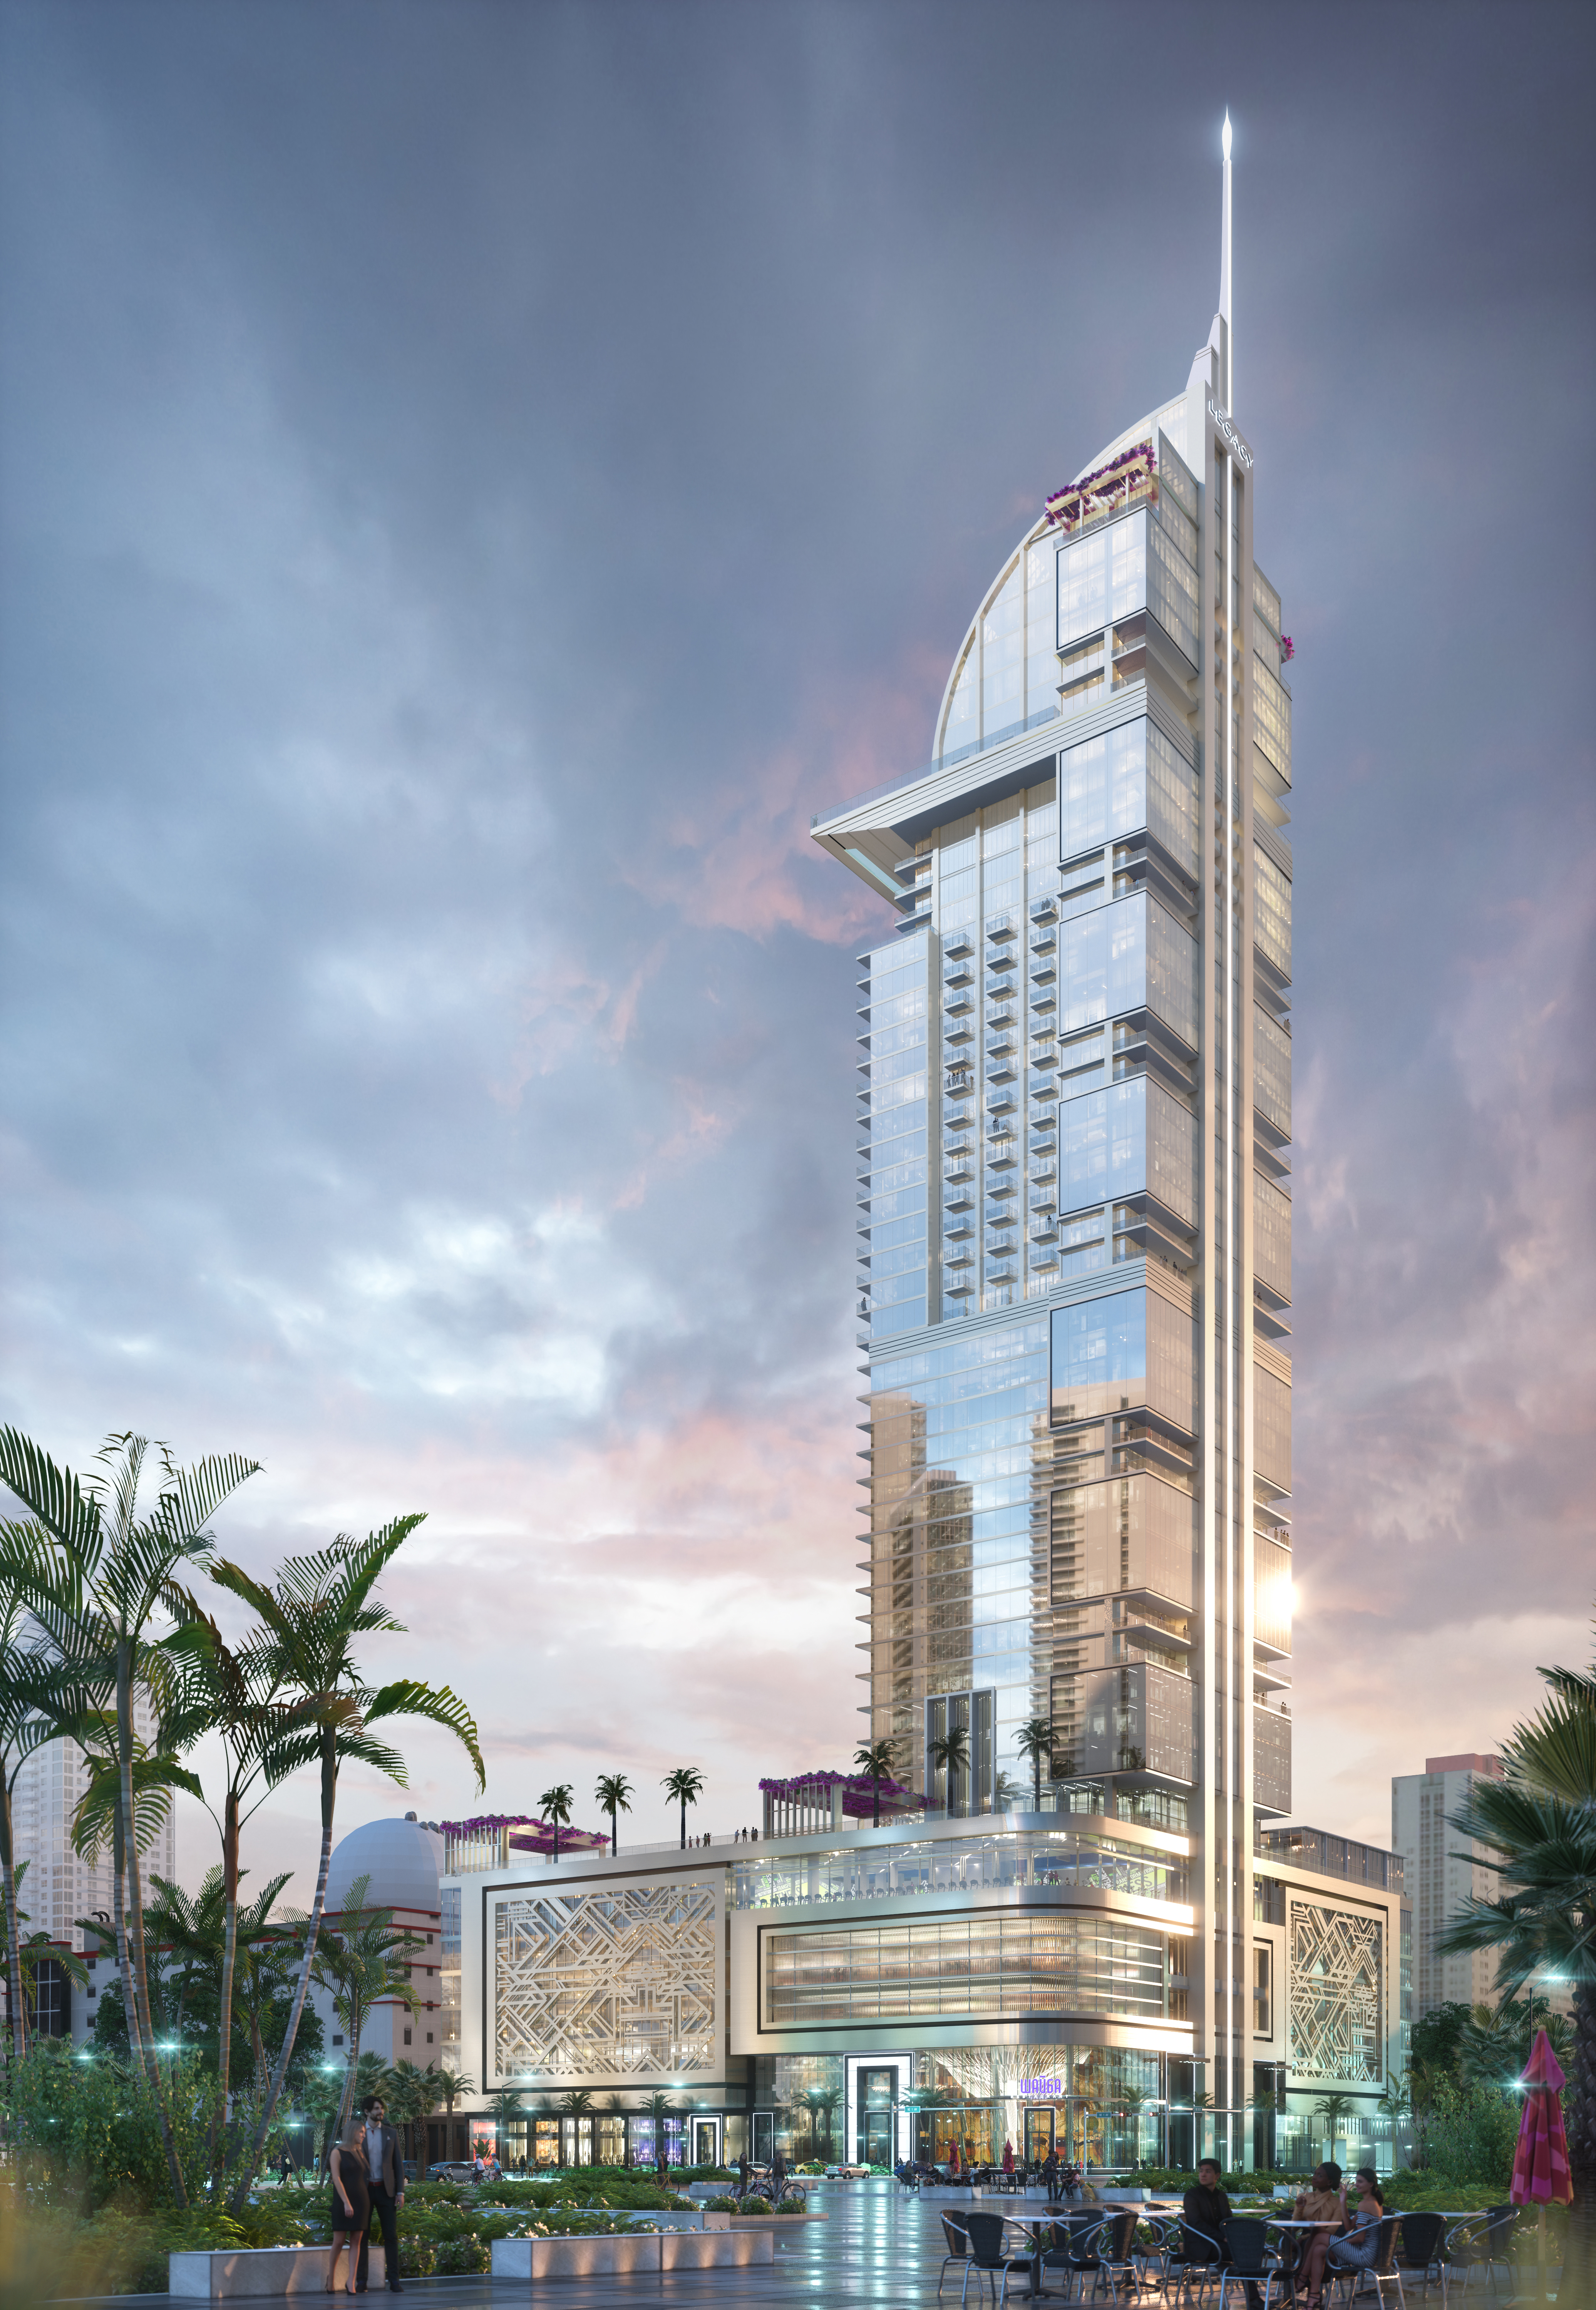 Artist�s rendering of 55-story, 600-foot, $500-million Legacy Tower at Miami Worldcenter, which will be the world�s first COVID-Conscious, Pandemic Ready, all-in-one residential, hotel, and medical center skyscraper.  (Source: Bryan Glazer/World Satellite Television News )